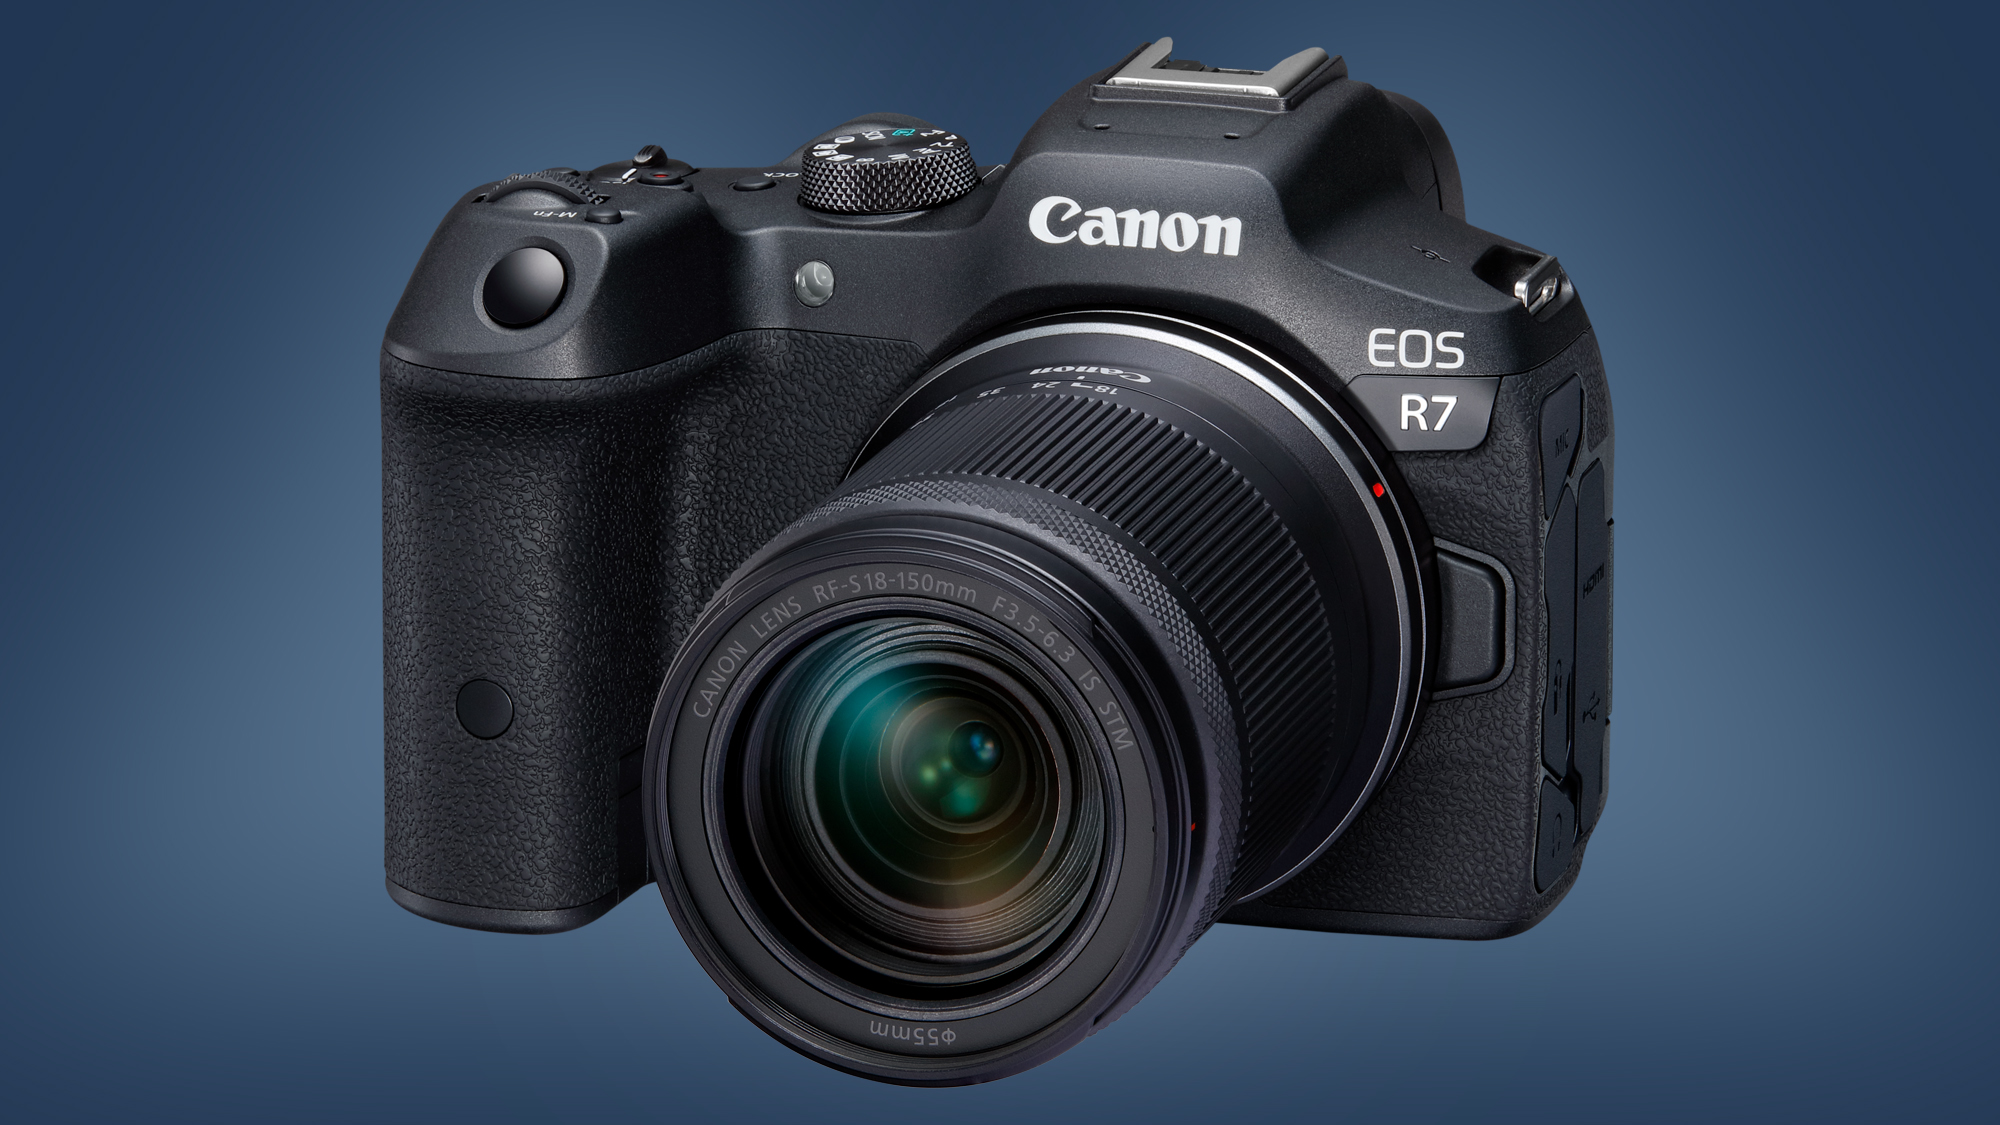 The Canon EOS R7 camera on a blue background